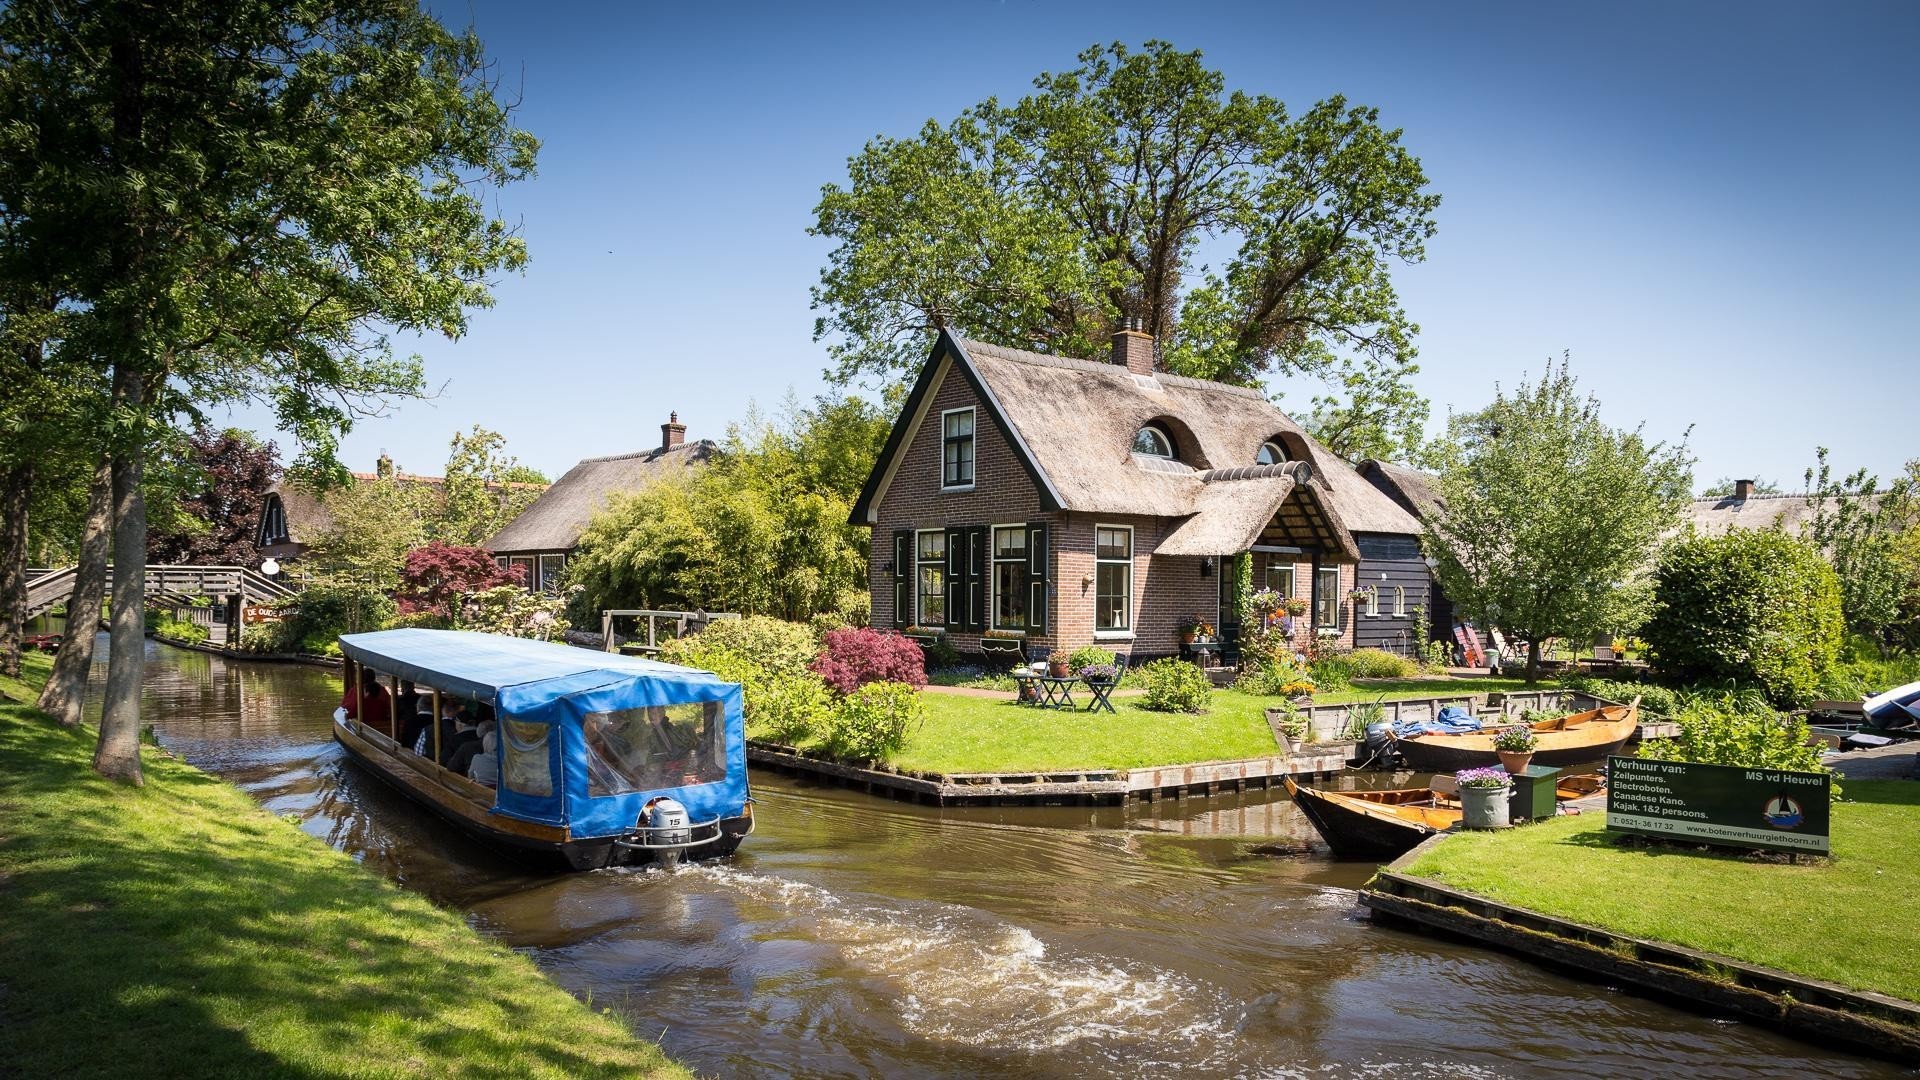 Tourism, People, Architecture, House, Netherlands, Water, Trees, Garden, Grass, Village, Boat, Flowers, Canal, Summer Wallpaper